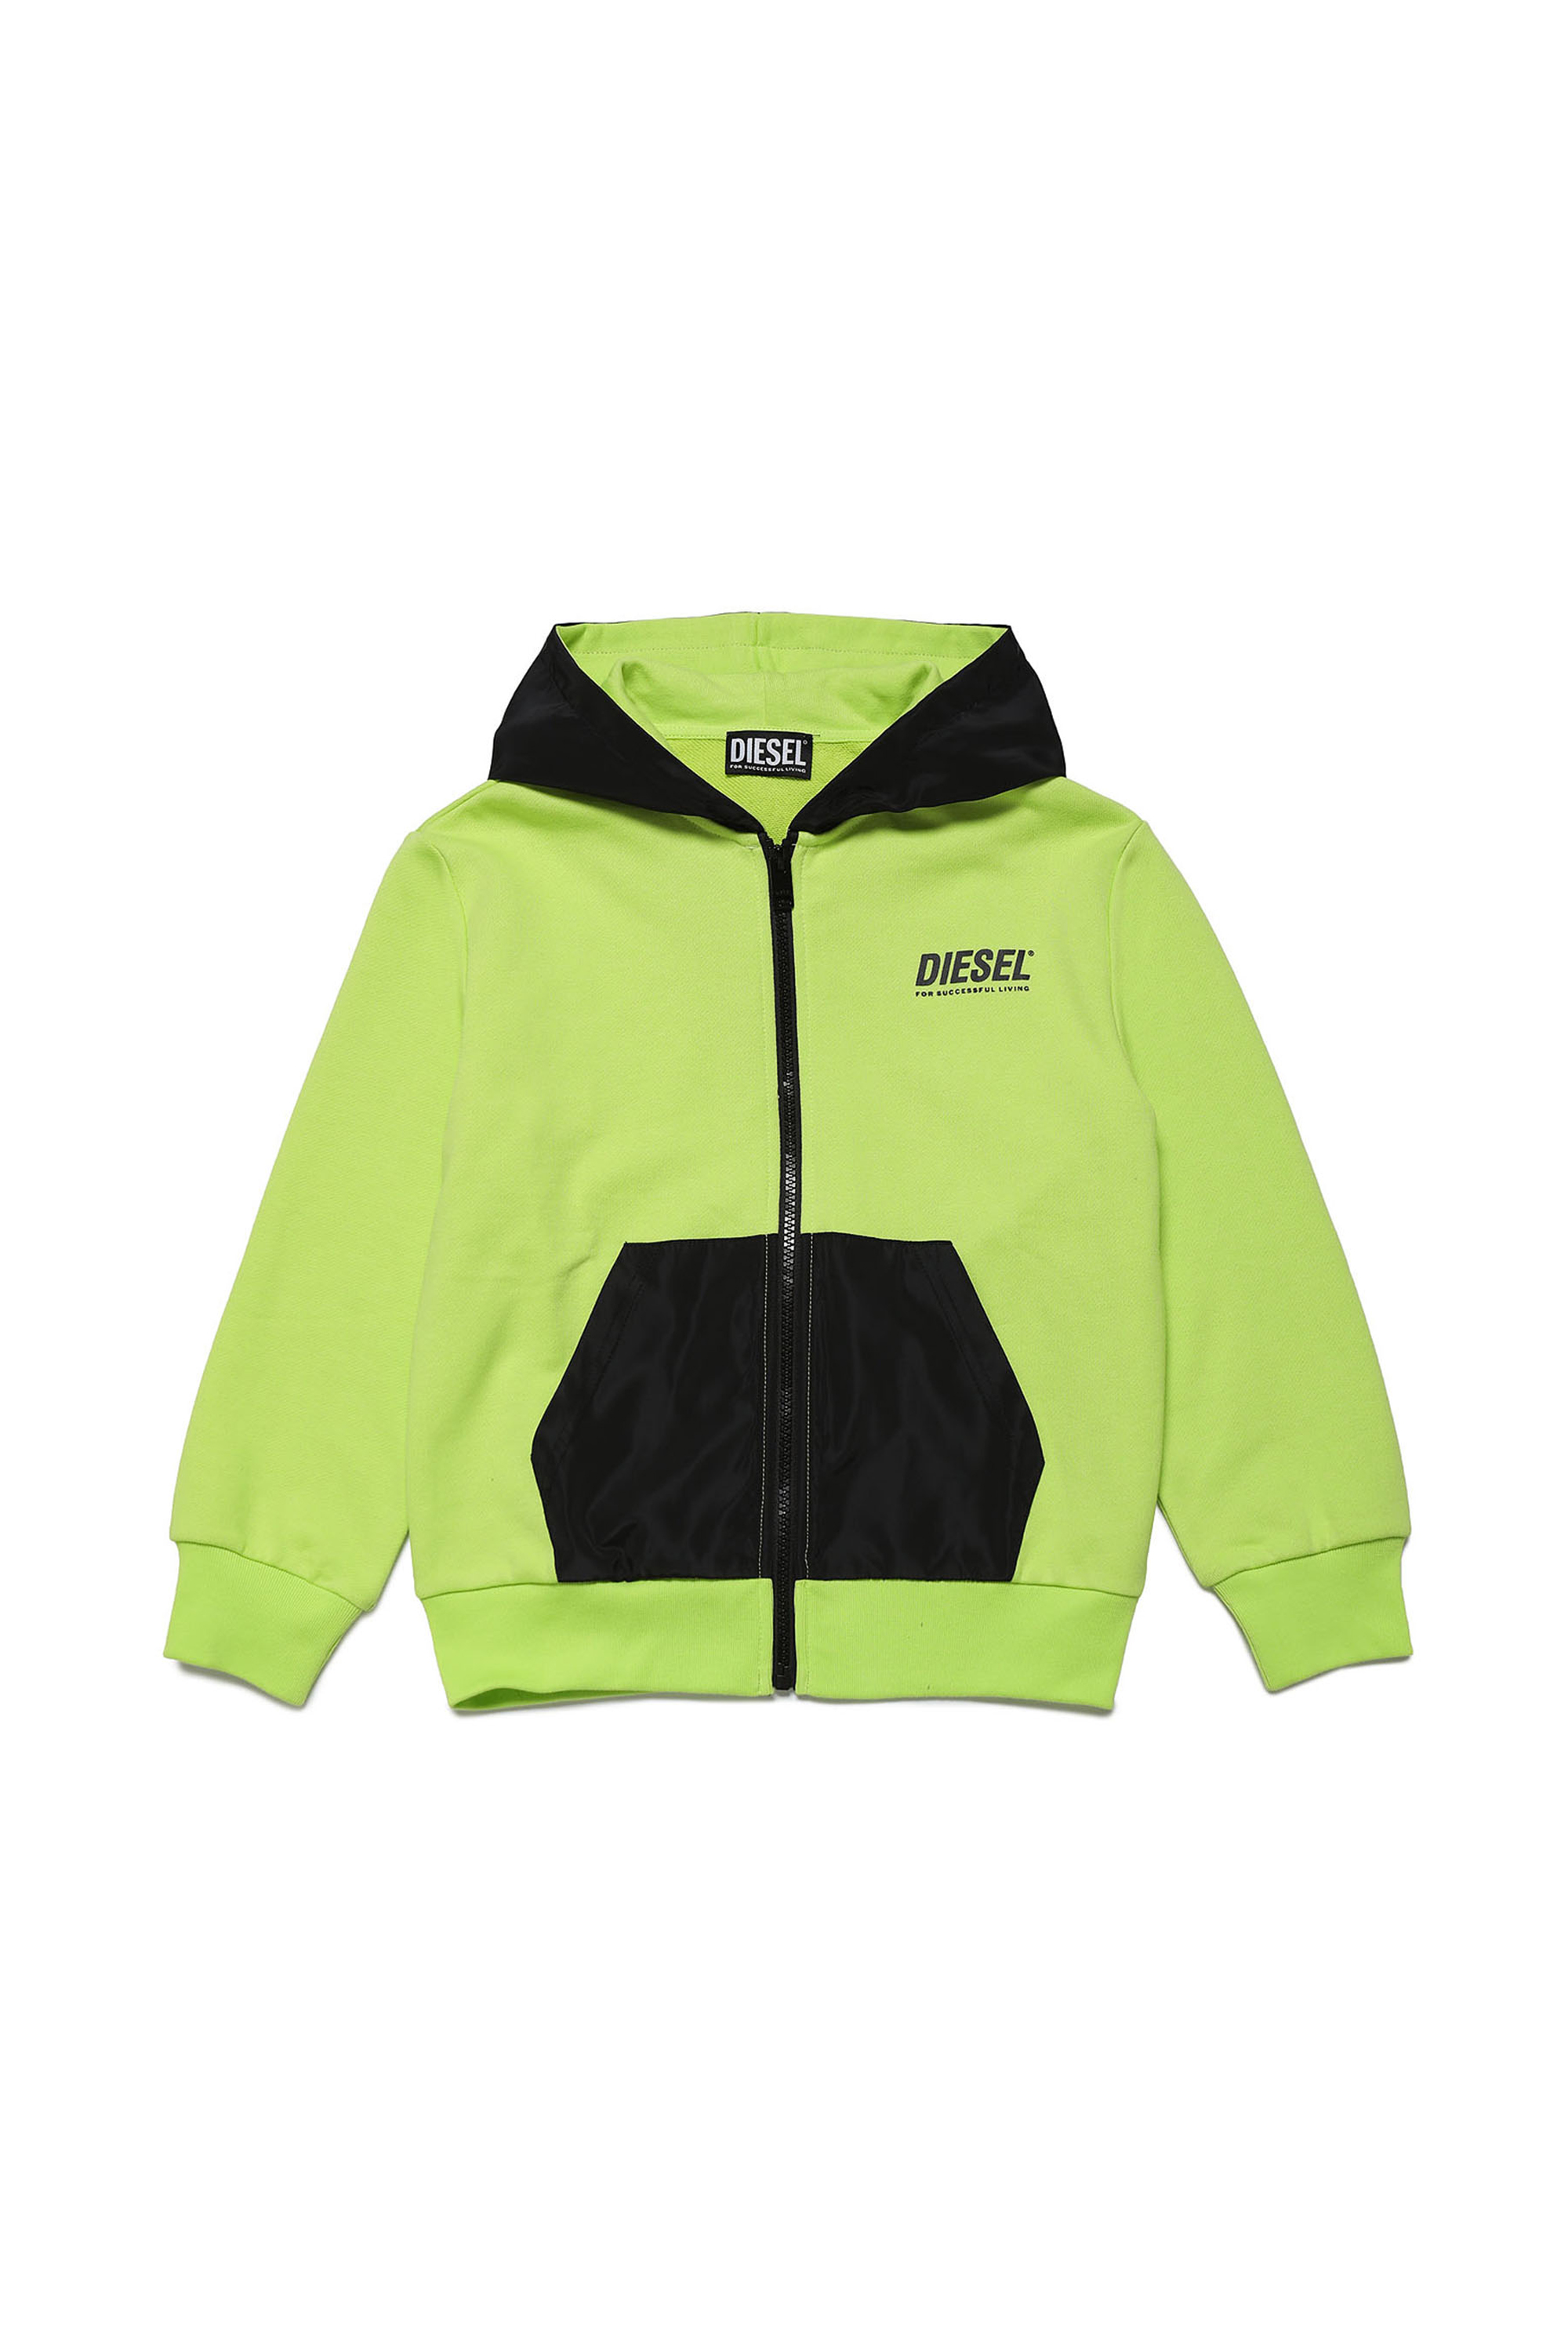 Diesel - MSEMMY OVER, Yellow Fluo - Image 1